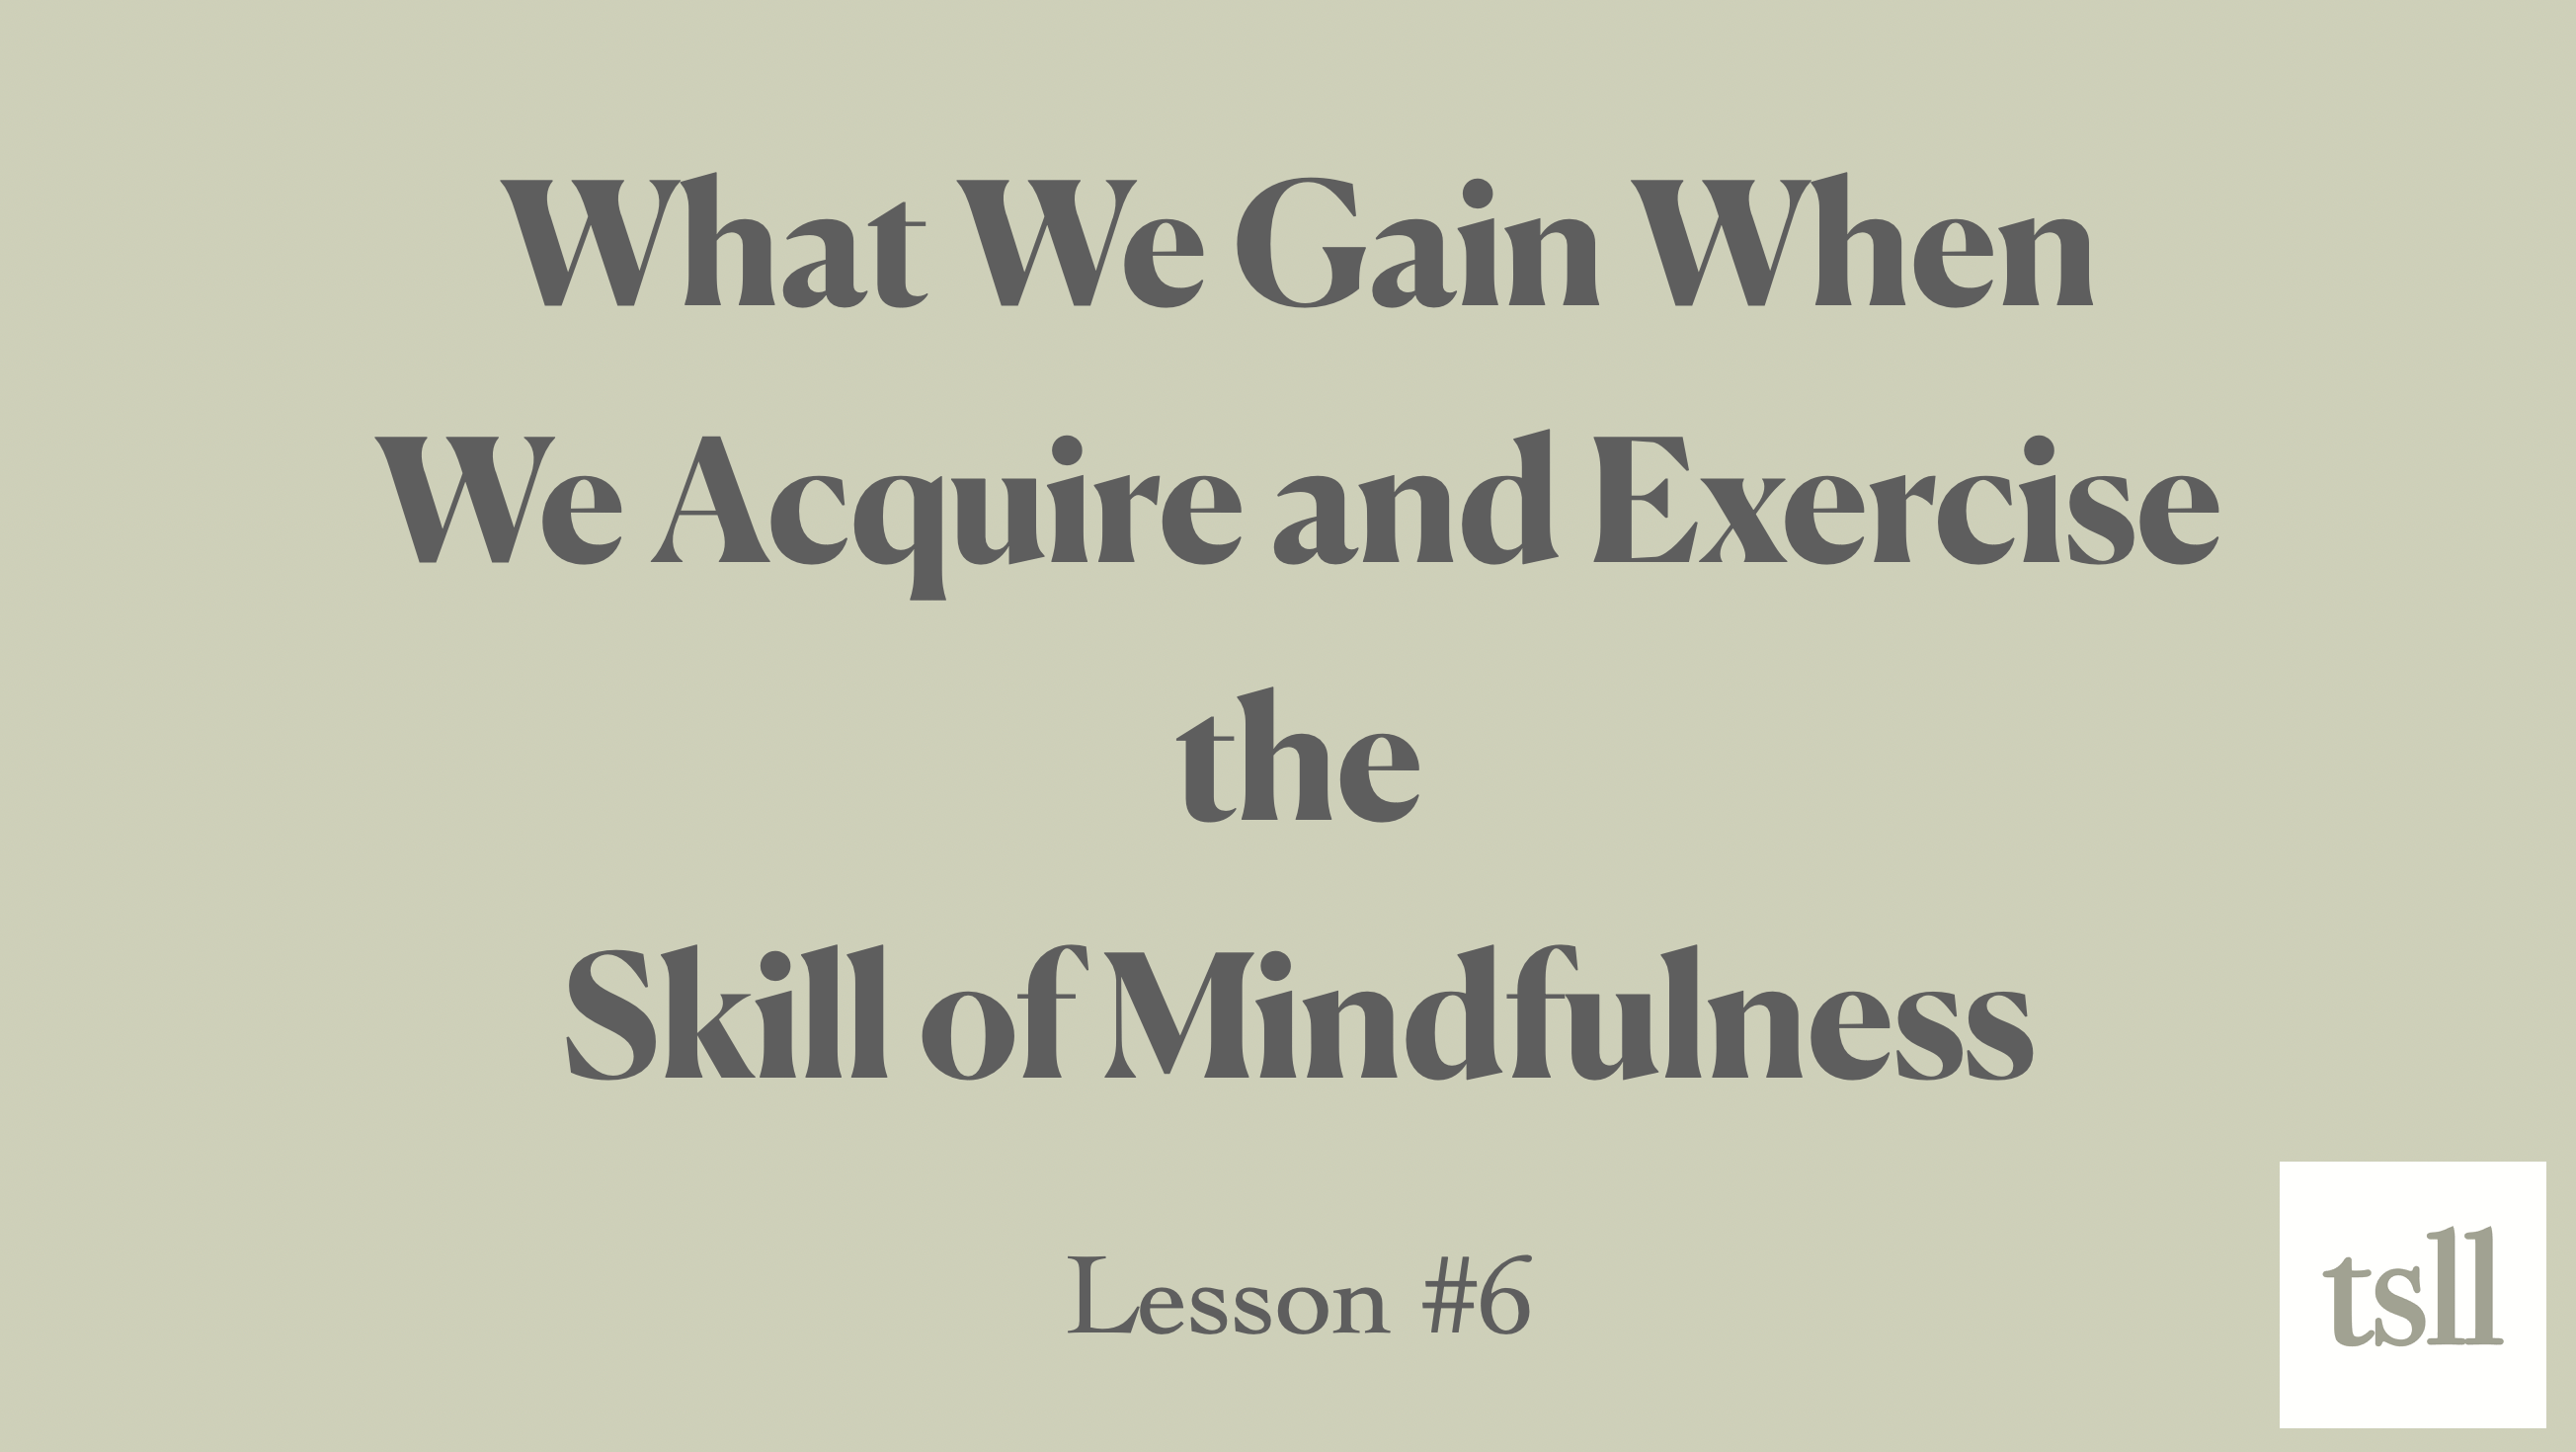 Part 2: What We Gain When We Acquire and Exercise the Skill of Mindfulness (5:27)